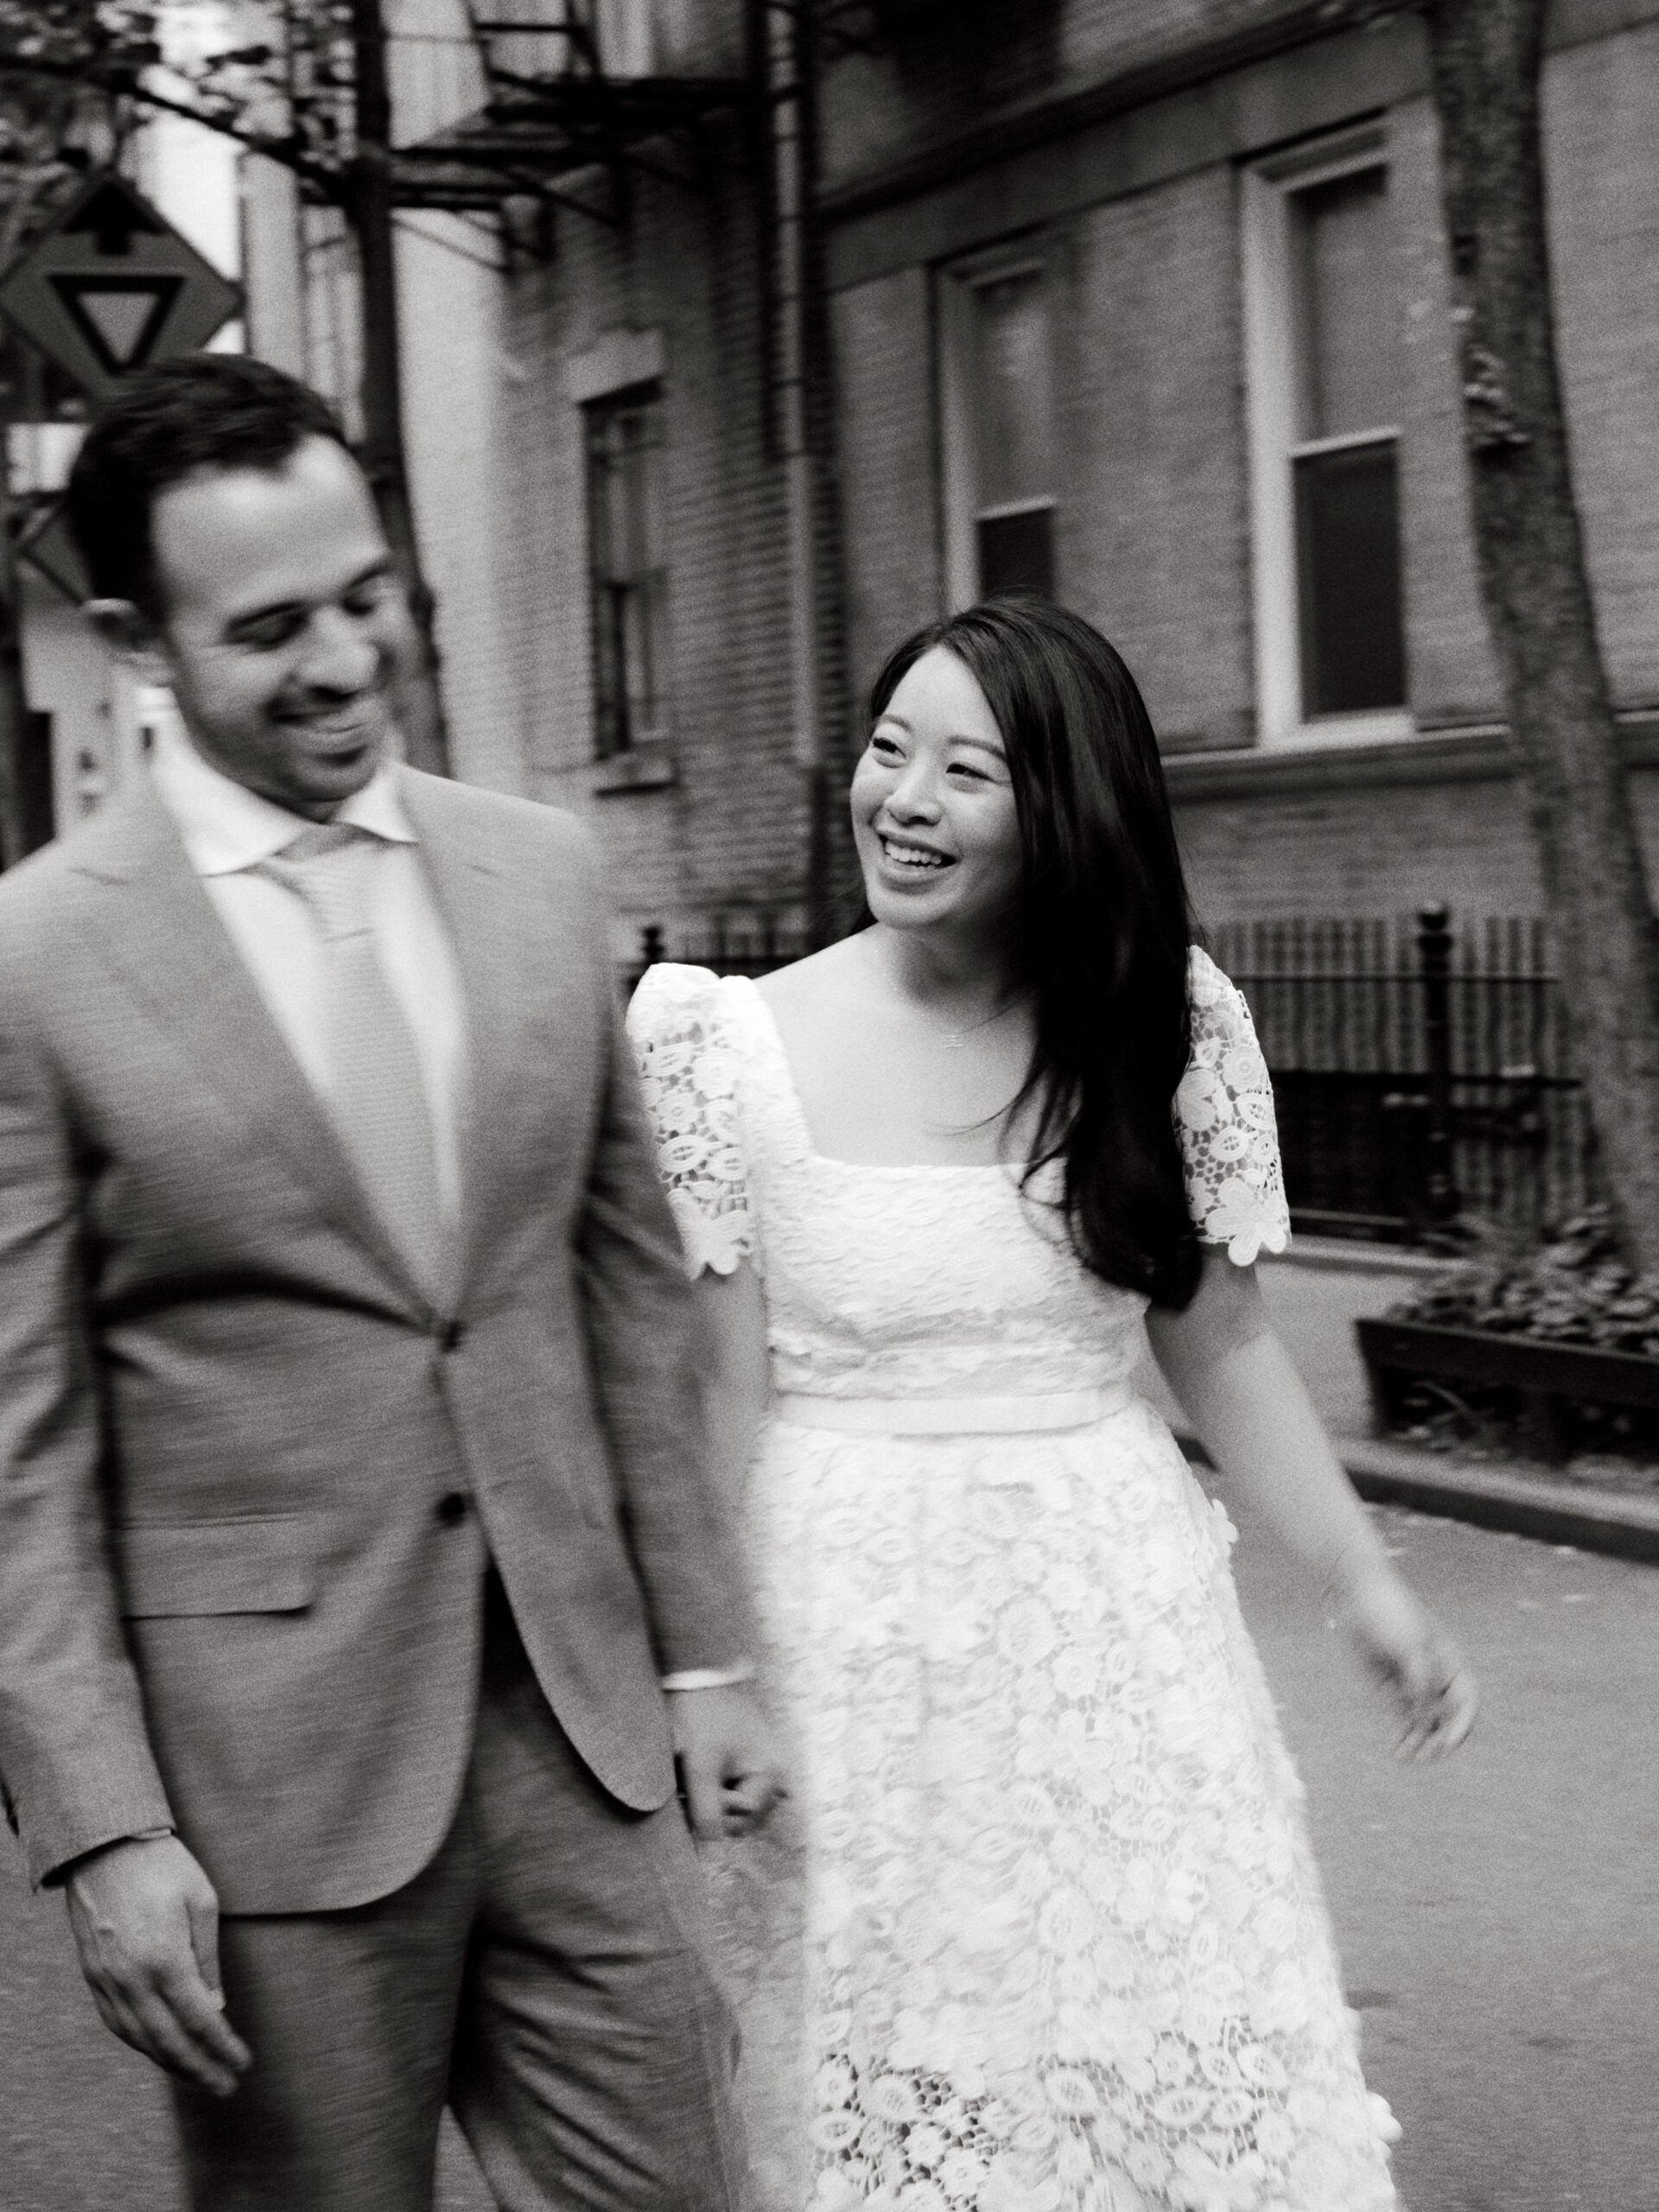 Editorial photo of the engaged couple happily walking in the streets of New York. Image by Jenny Fu Studio